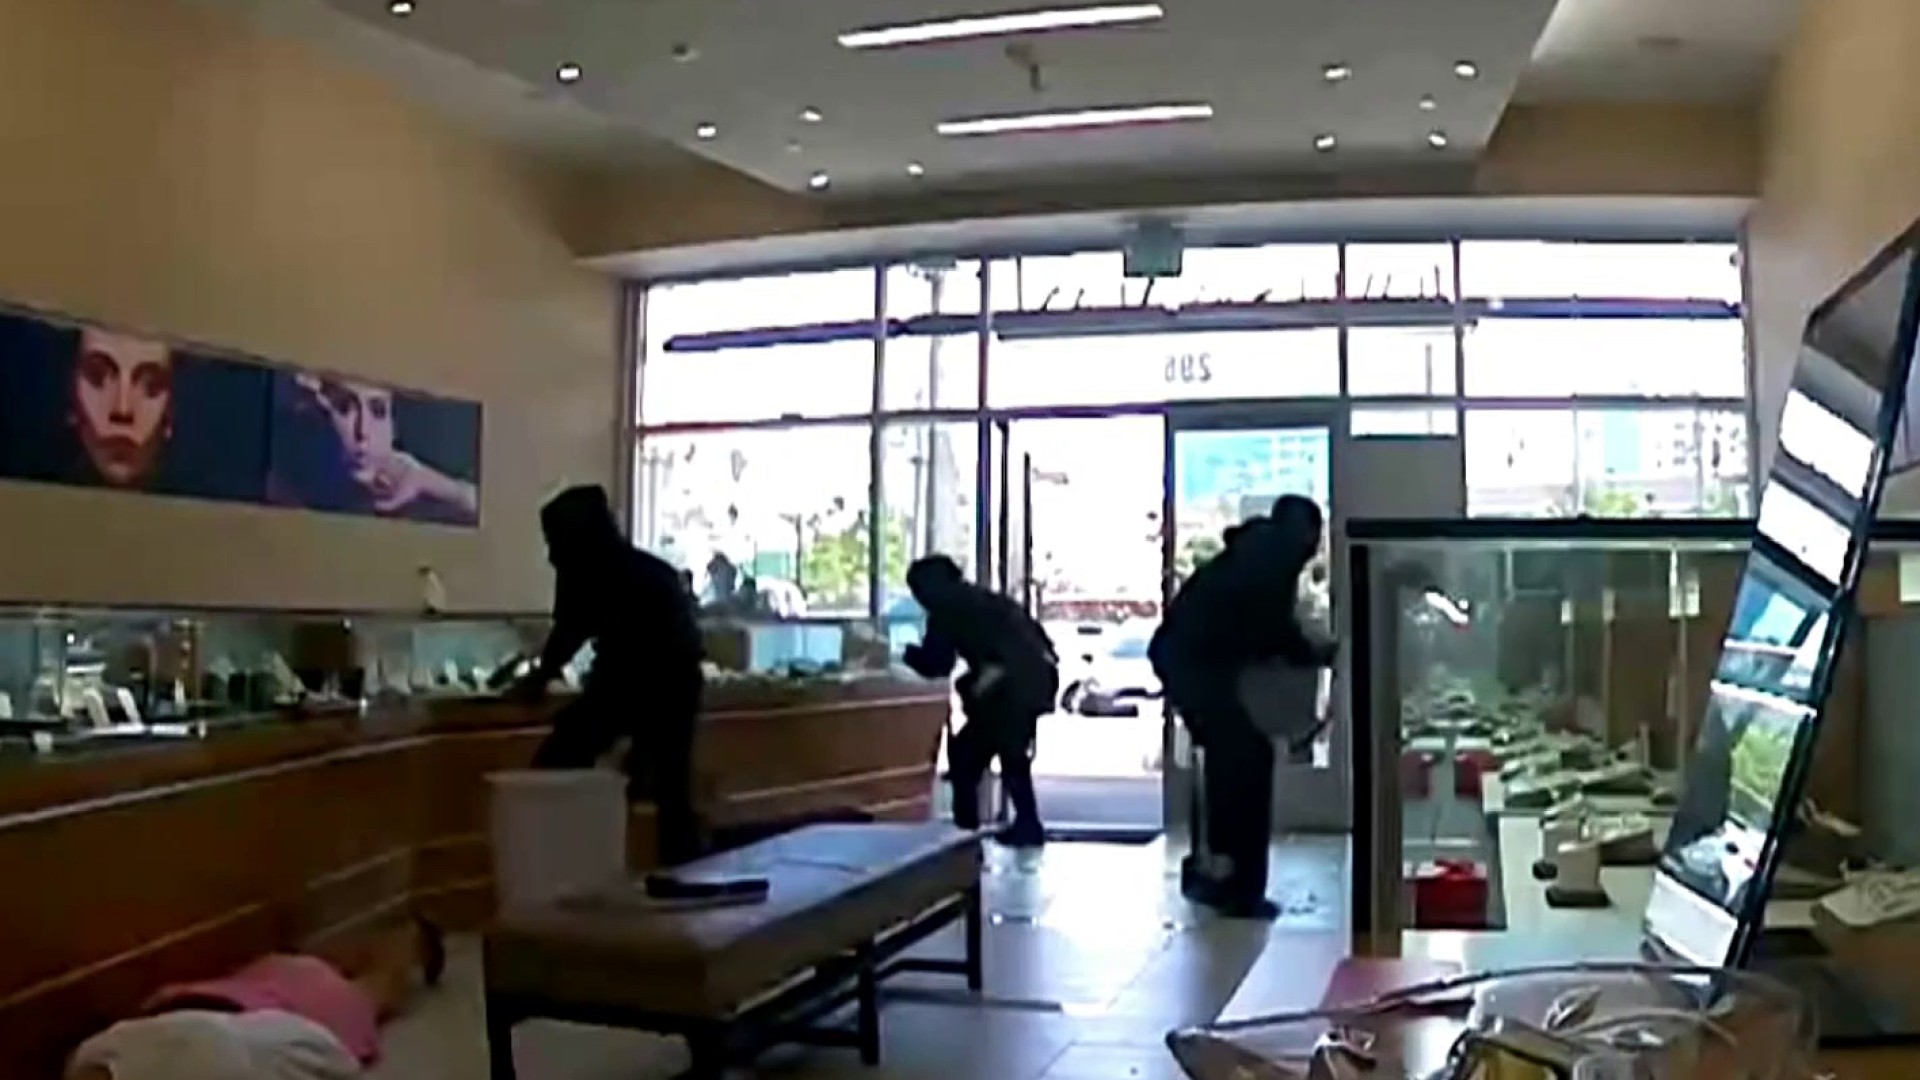 LA-area stores targeted by smash-and-grab robberies